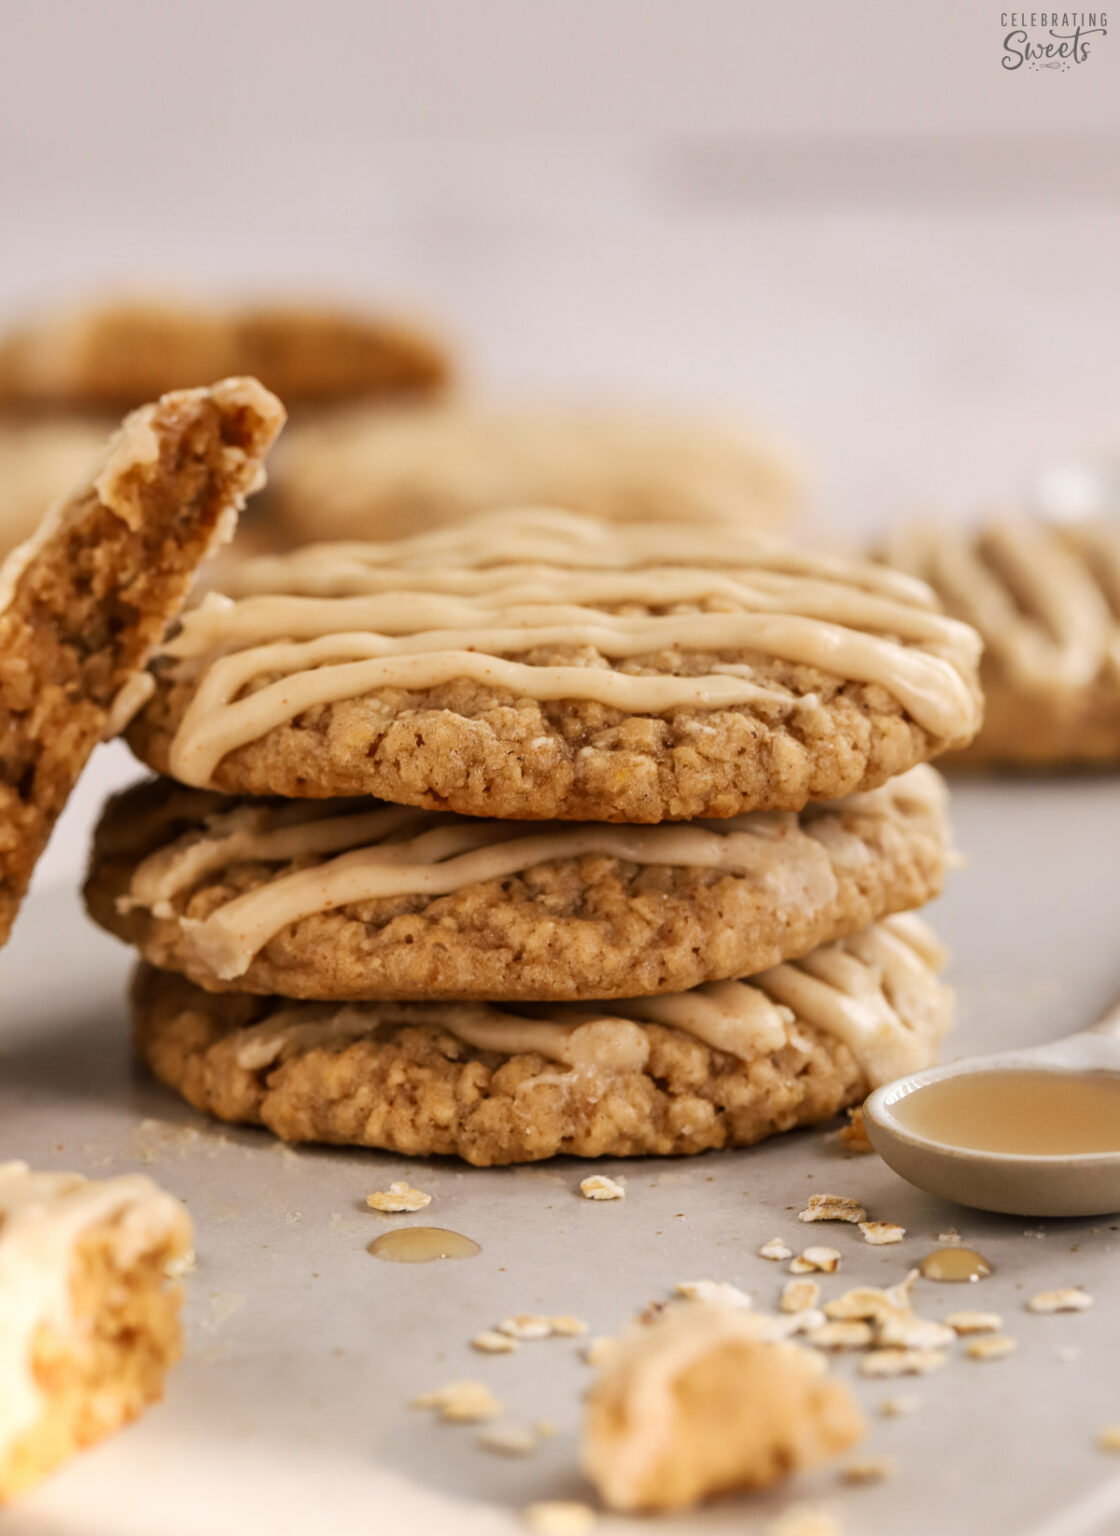 Maple Oatmeal Cookies - Celebrating Sweets